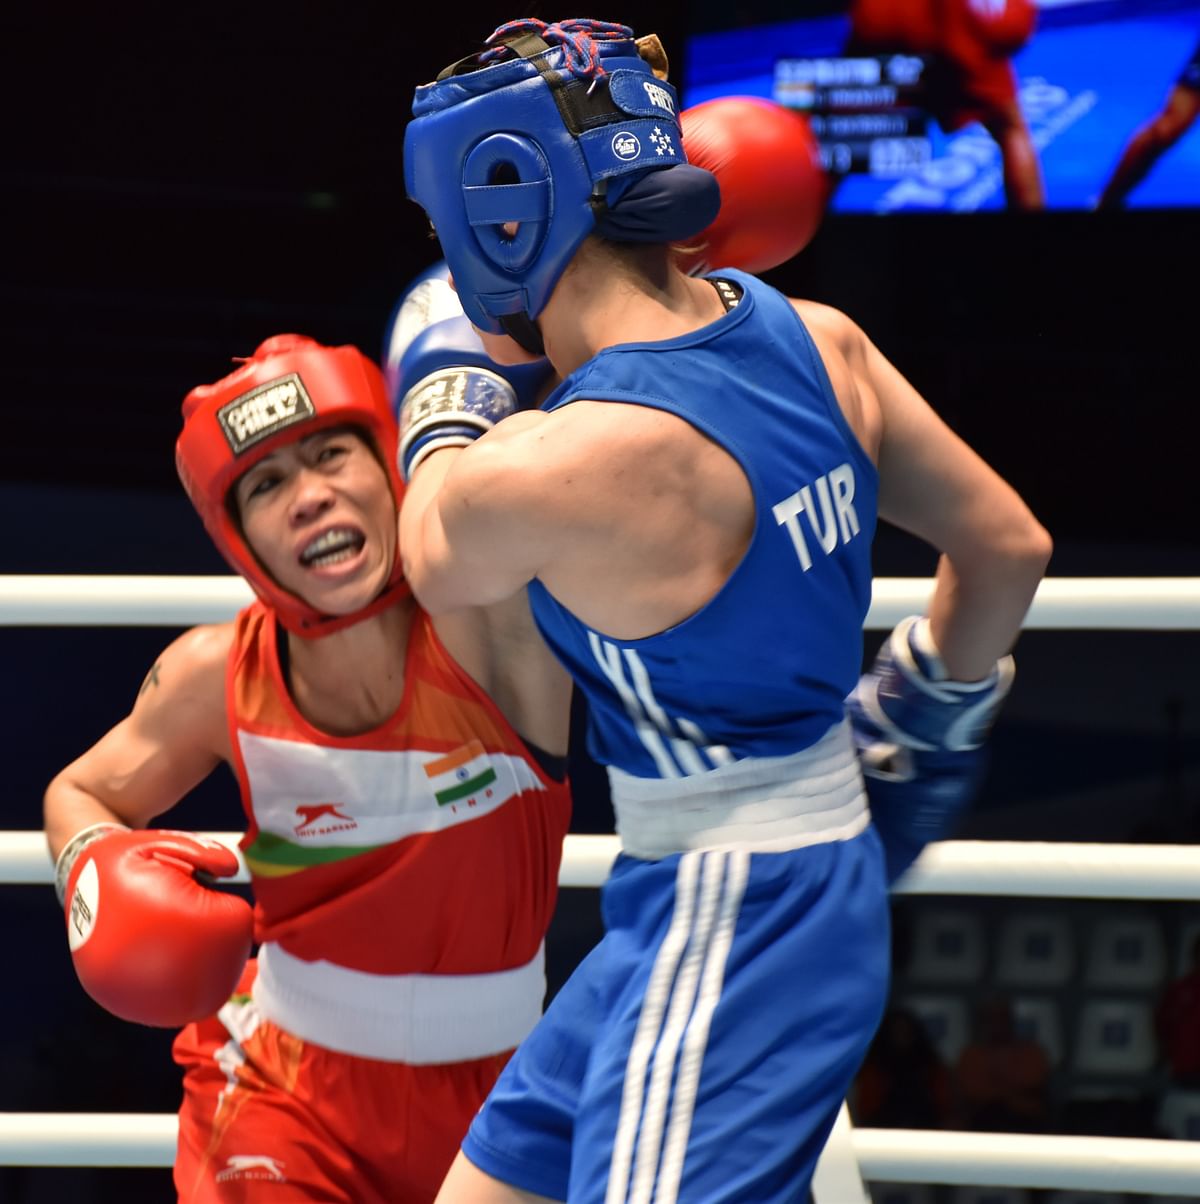 MC Mary Kom (51kg) asserted that she was “proud” of her world championship campaign.